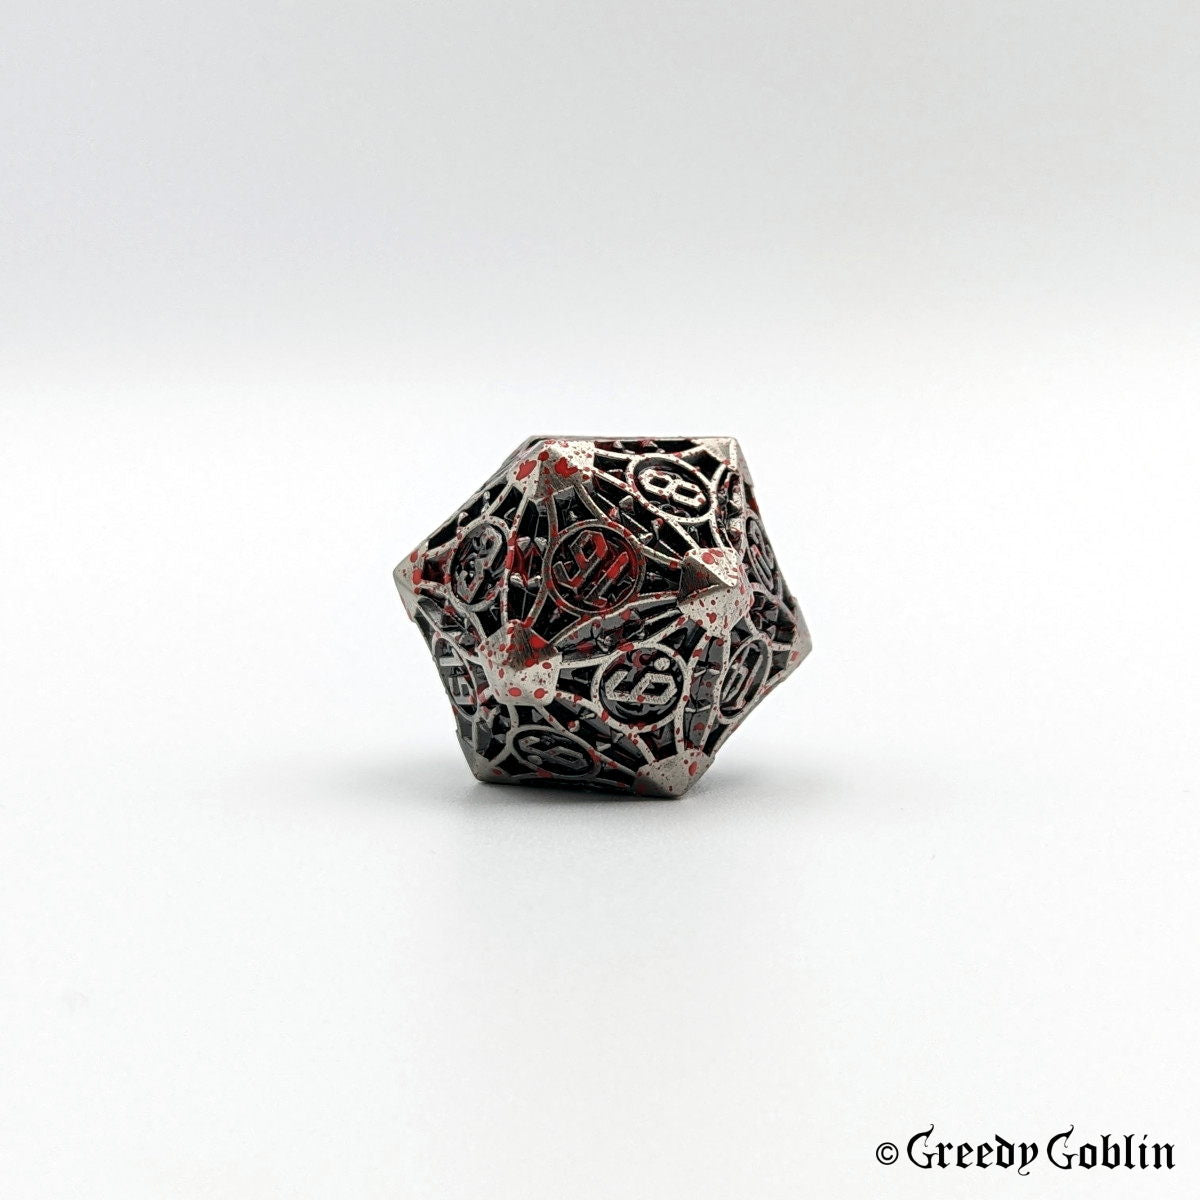 Metal grey D20 with red splatters from Polydice set.